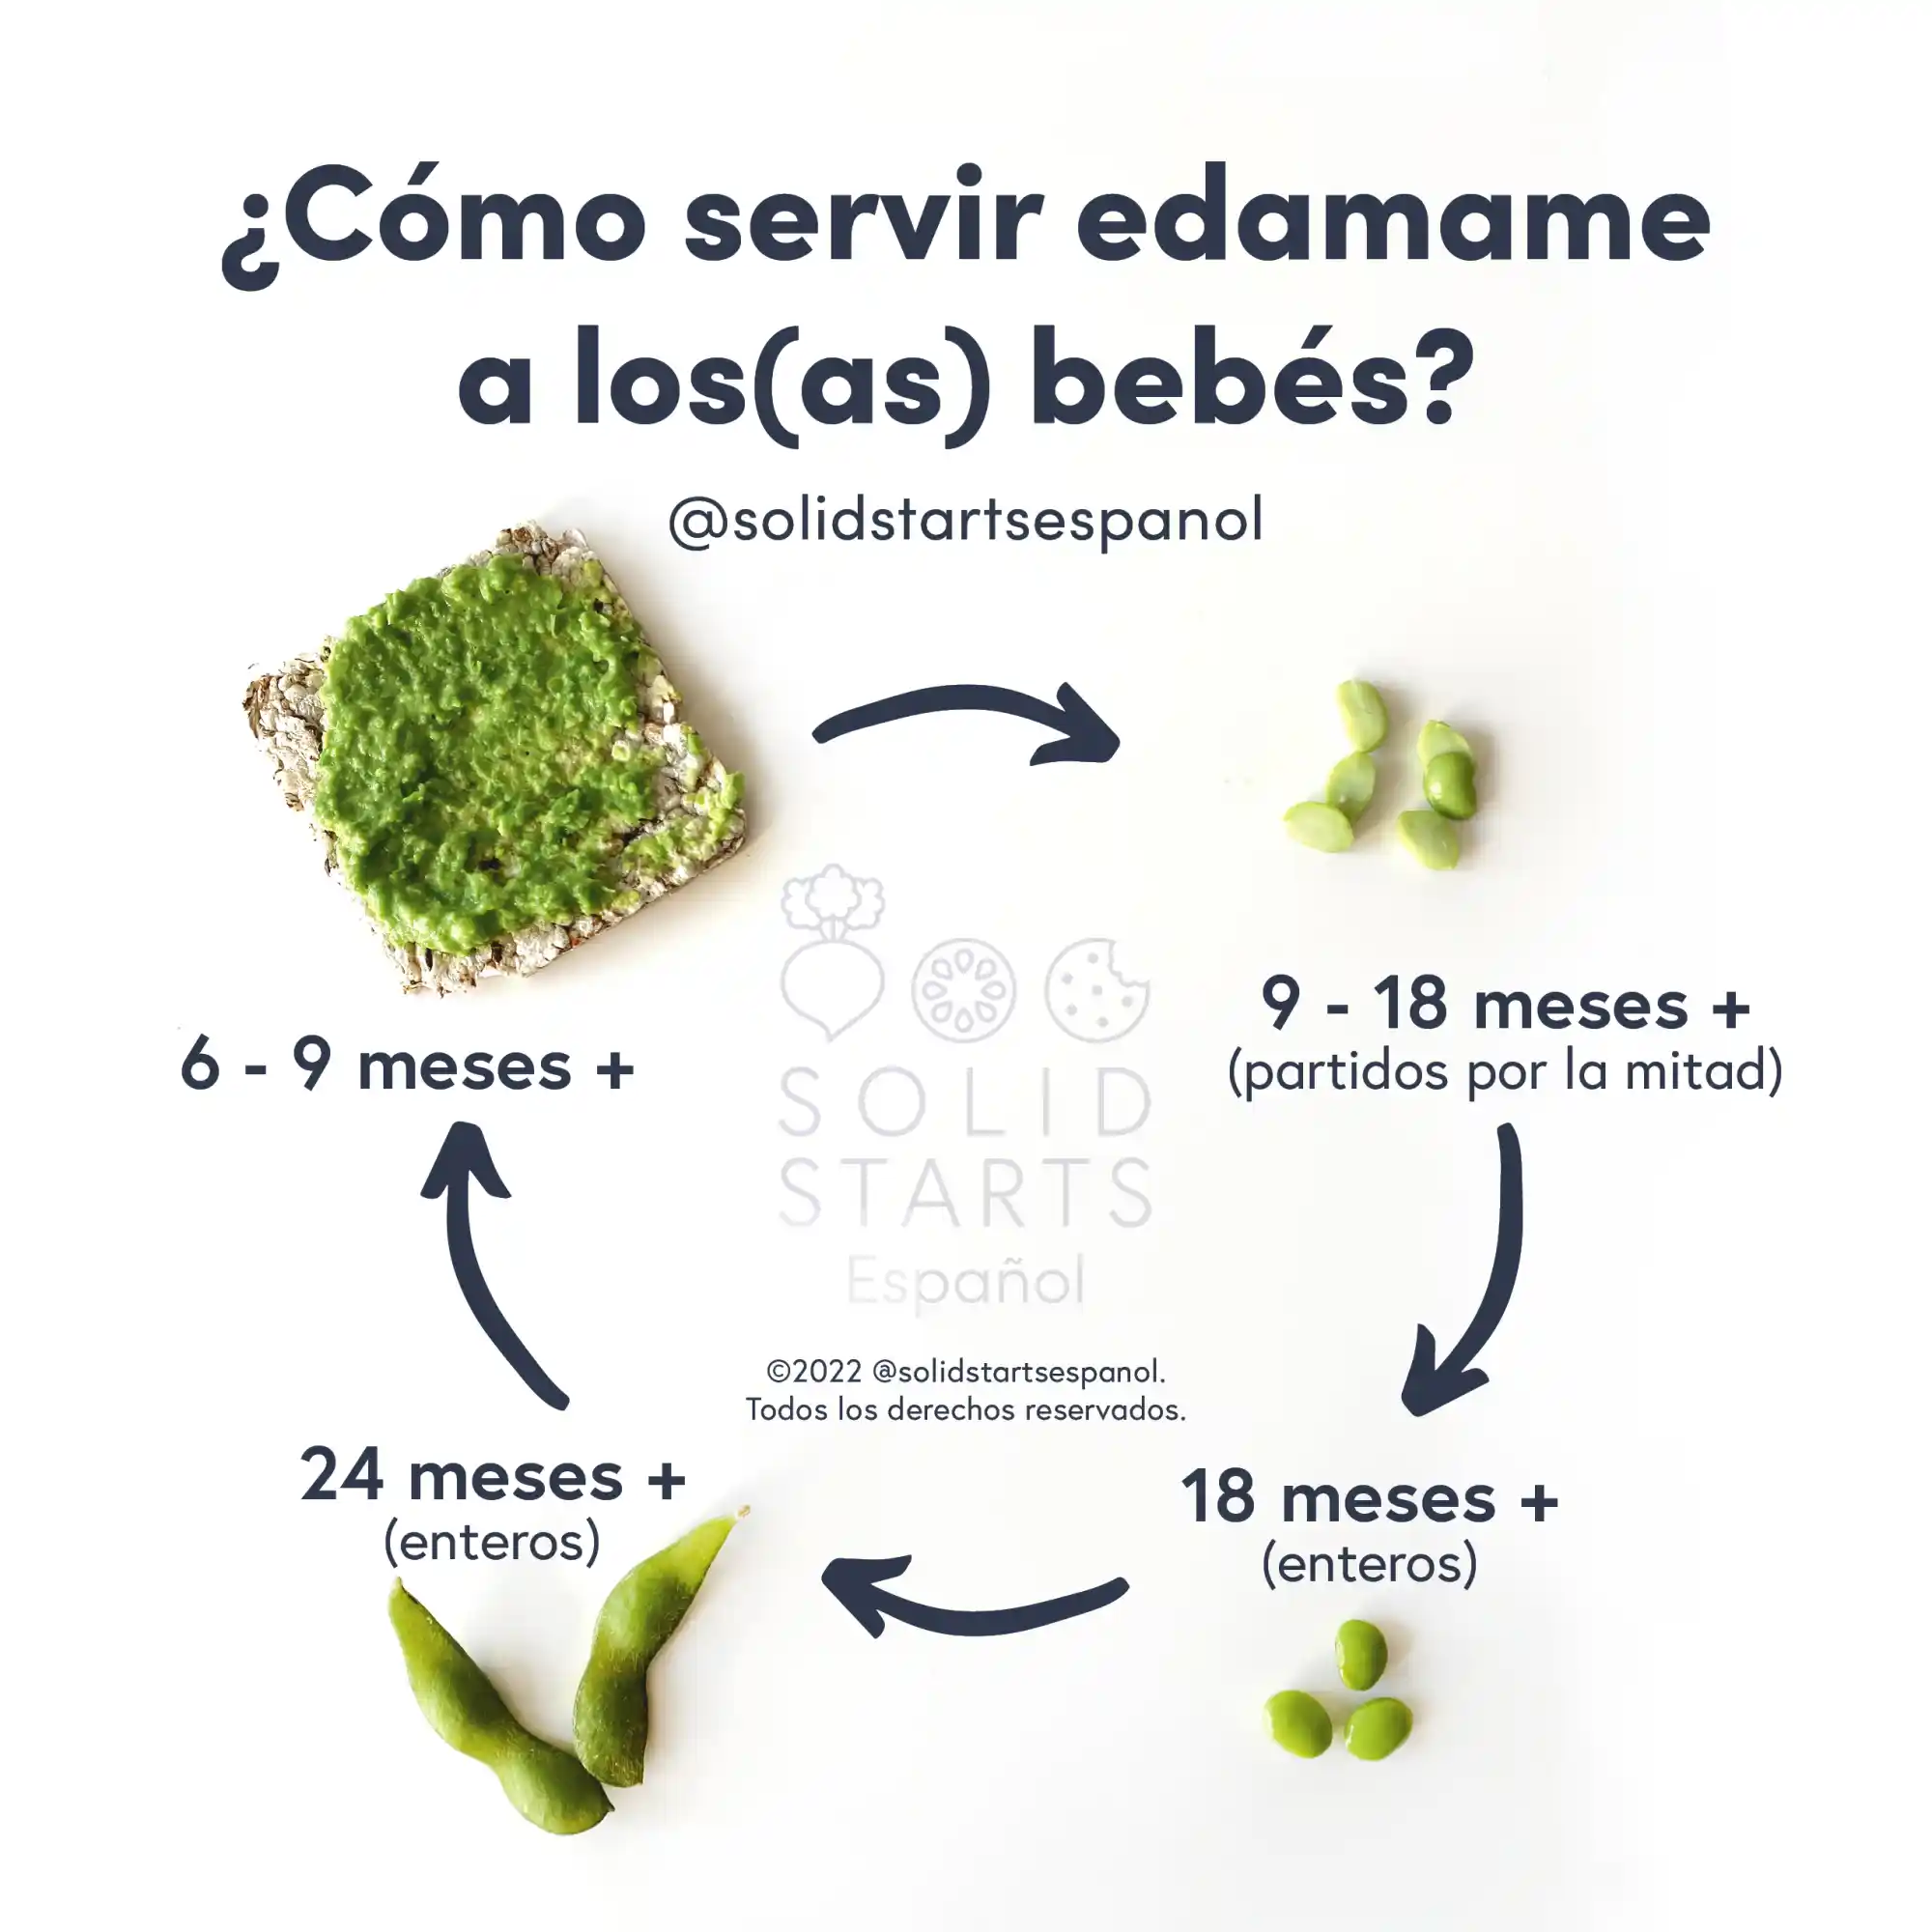 HOW TO CUT EDAMAME